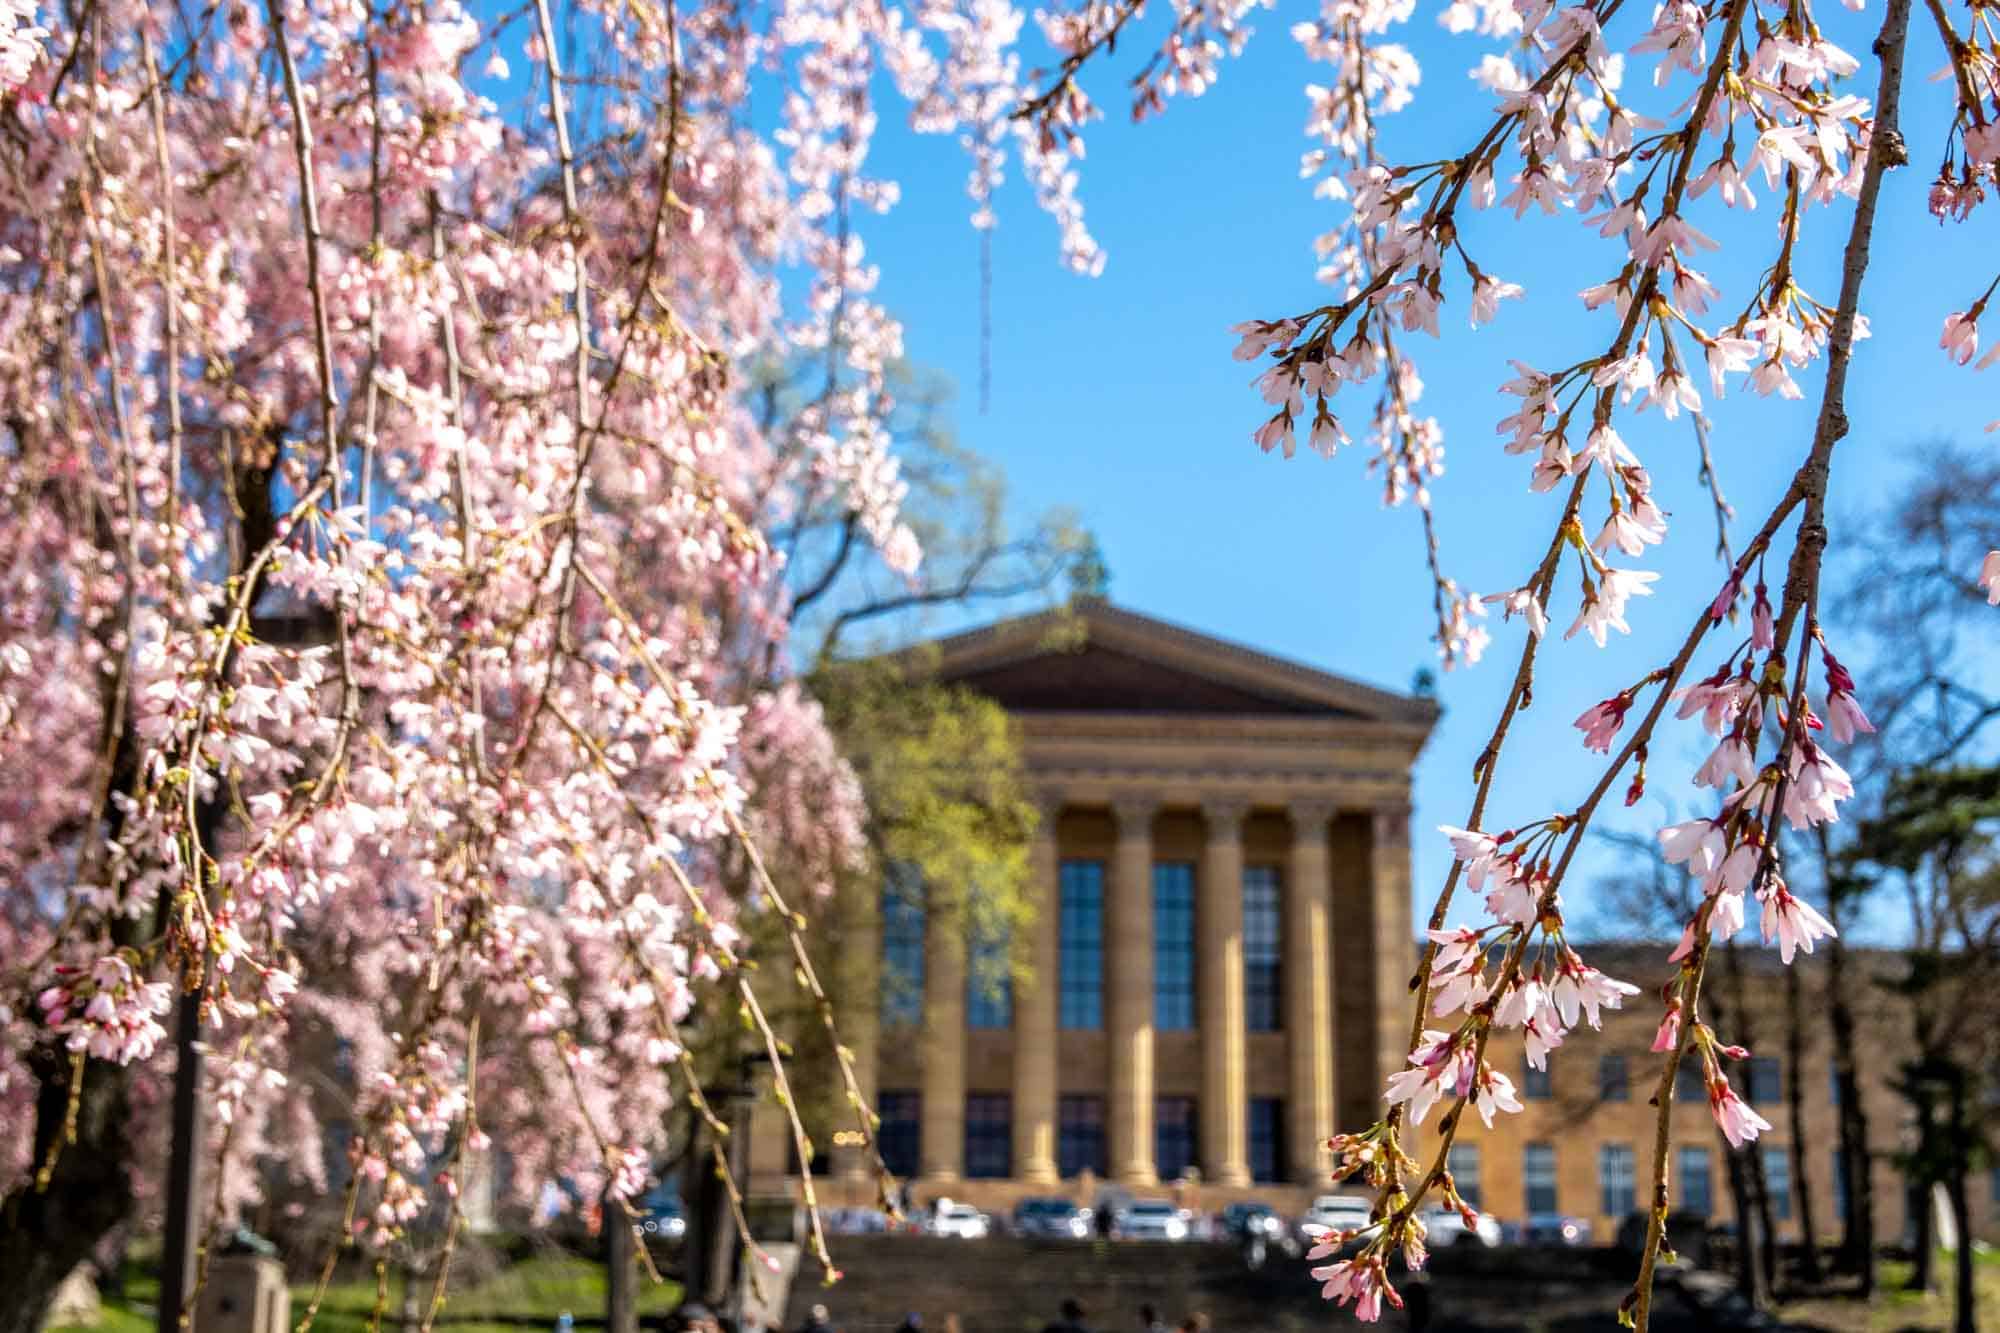 Branches full of pink blossoms framing a building with large columns in the background